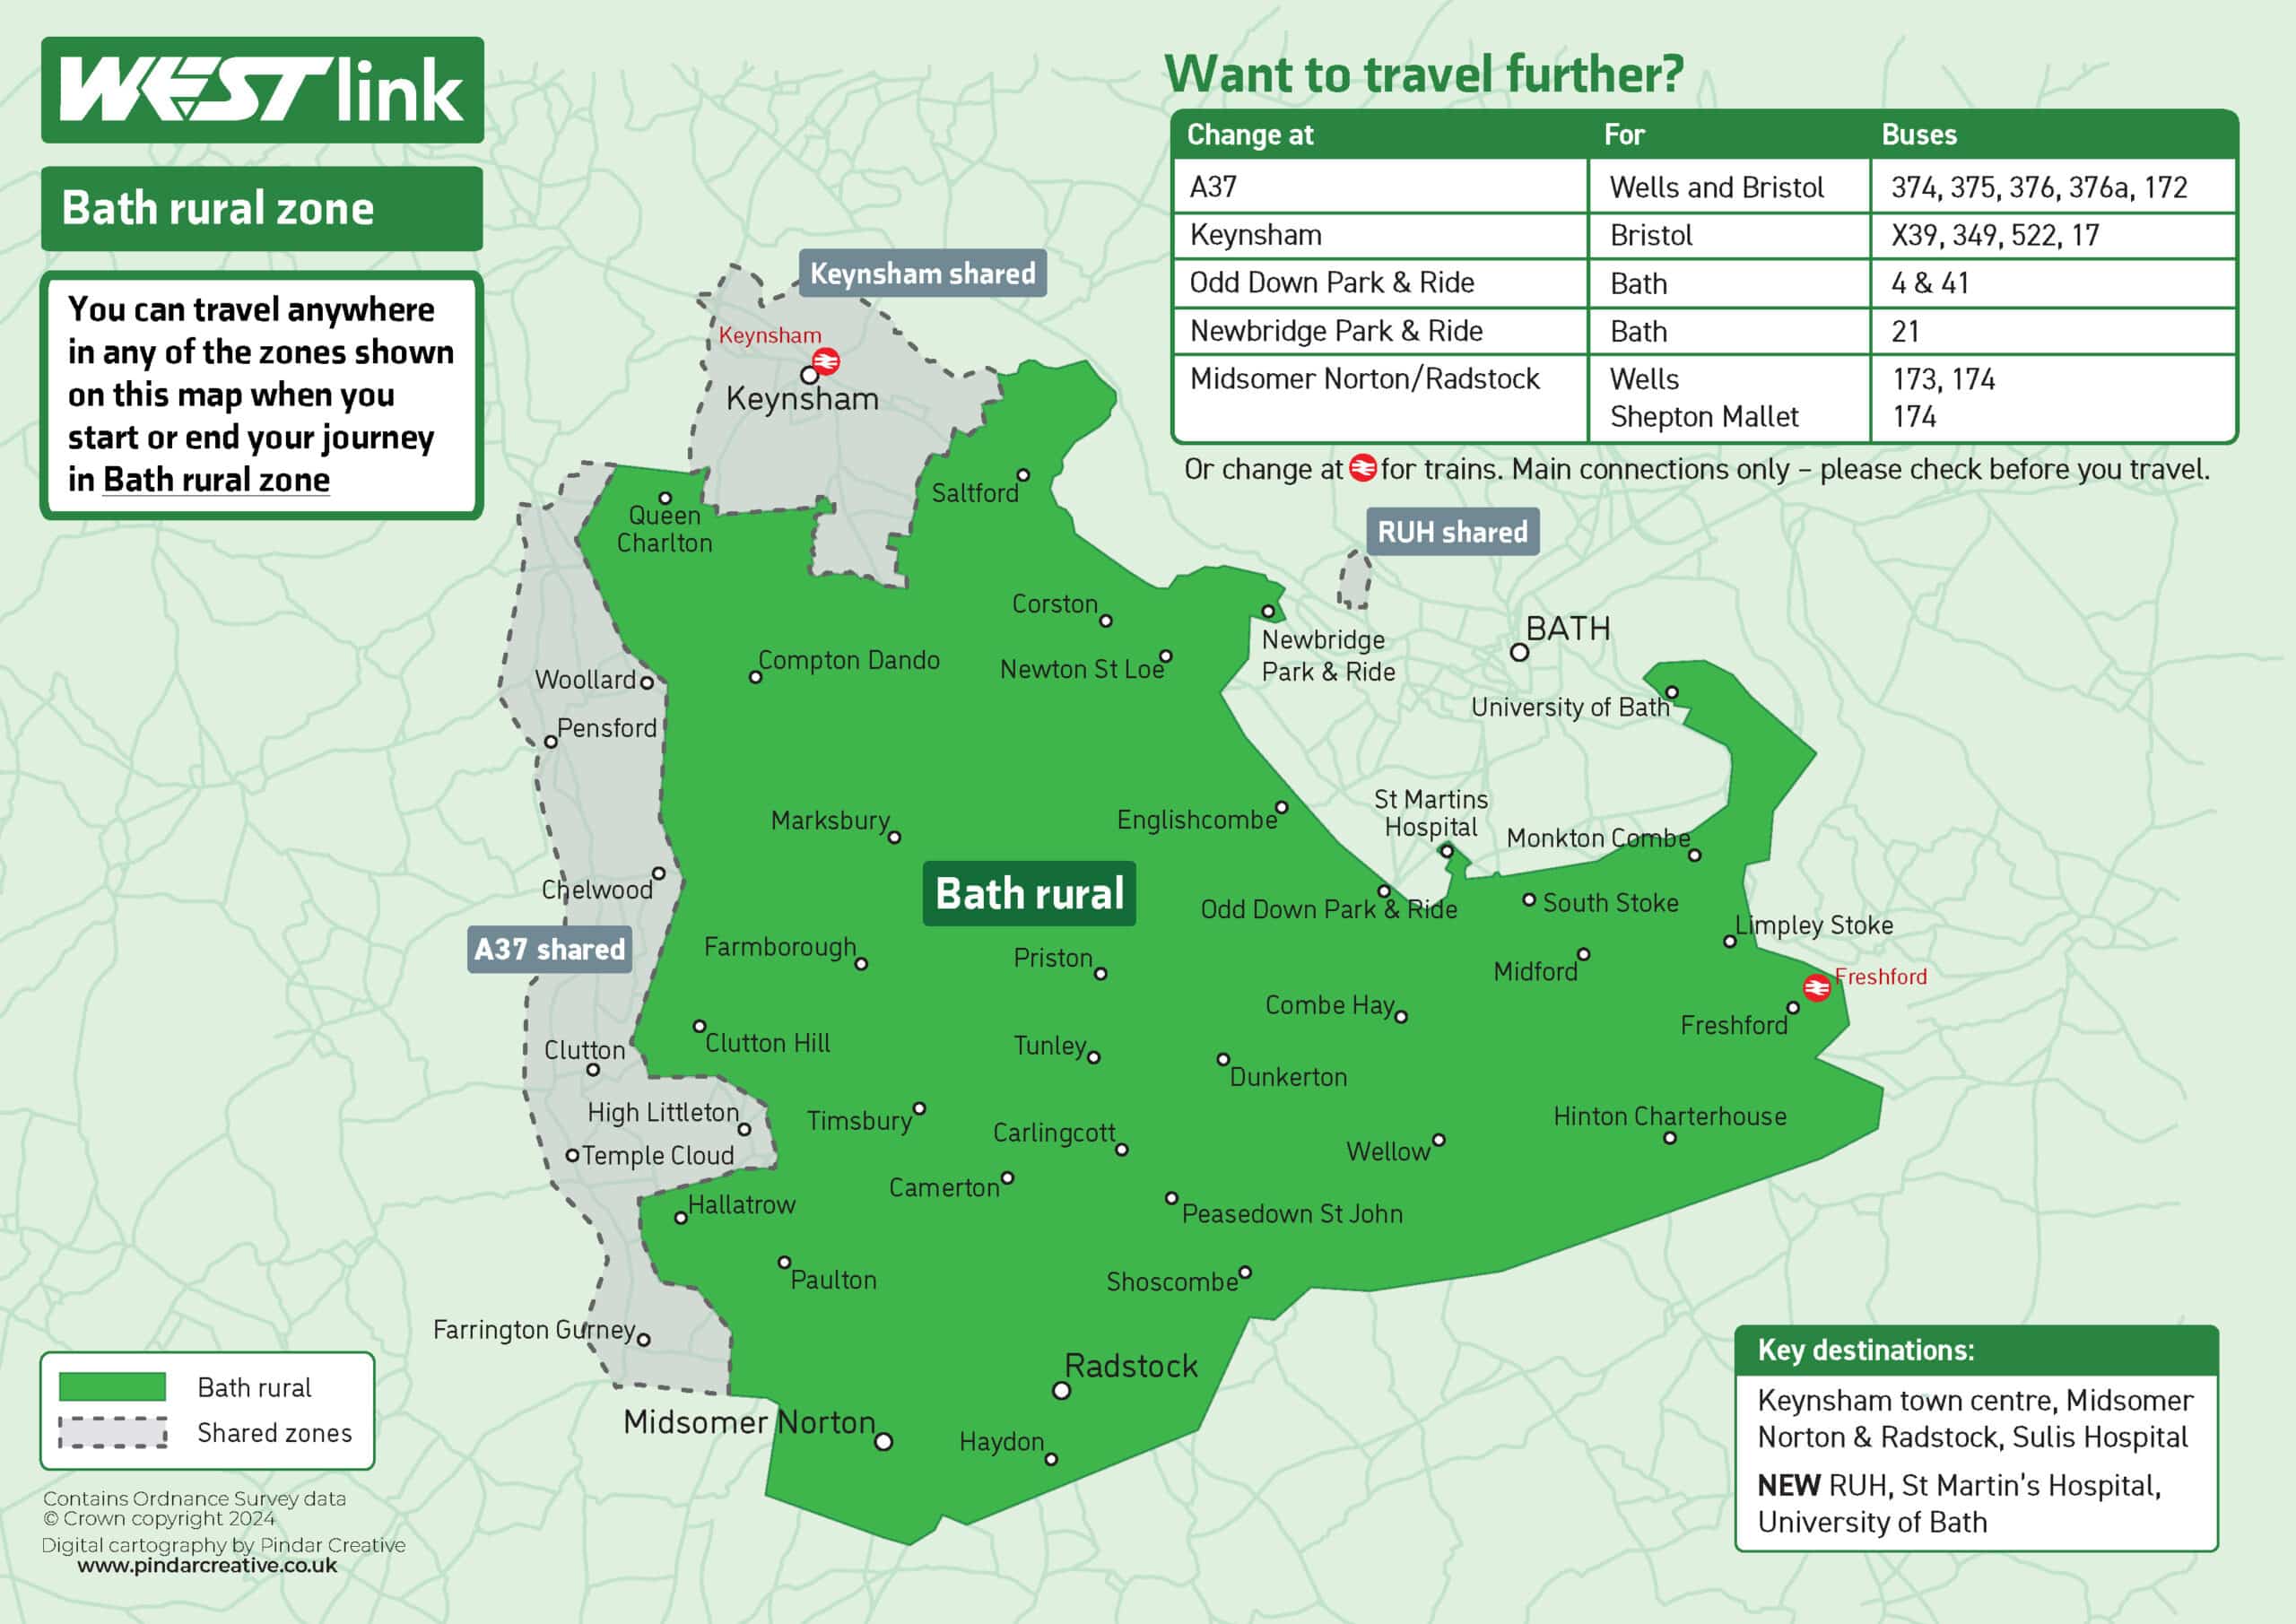 Bath rural zone map showing the boundaries and where you can travel. This information is also provided in an accessible version below.